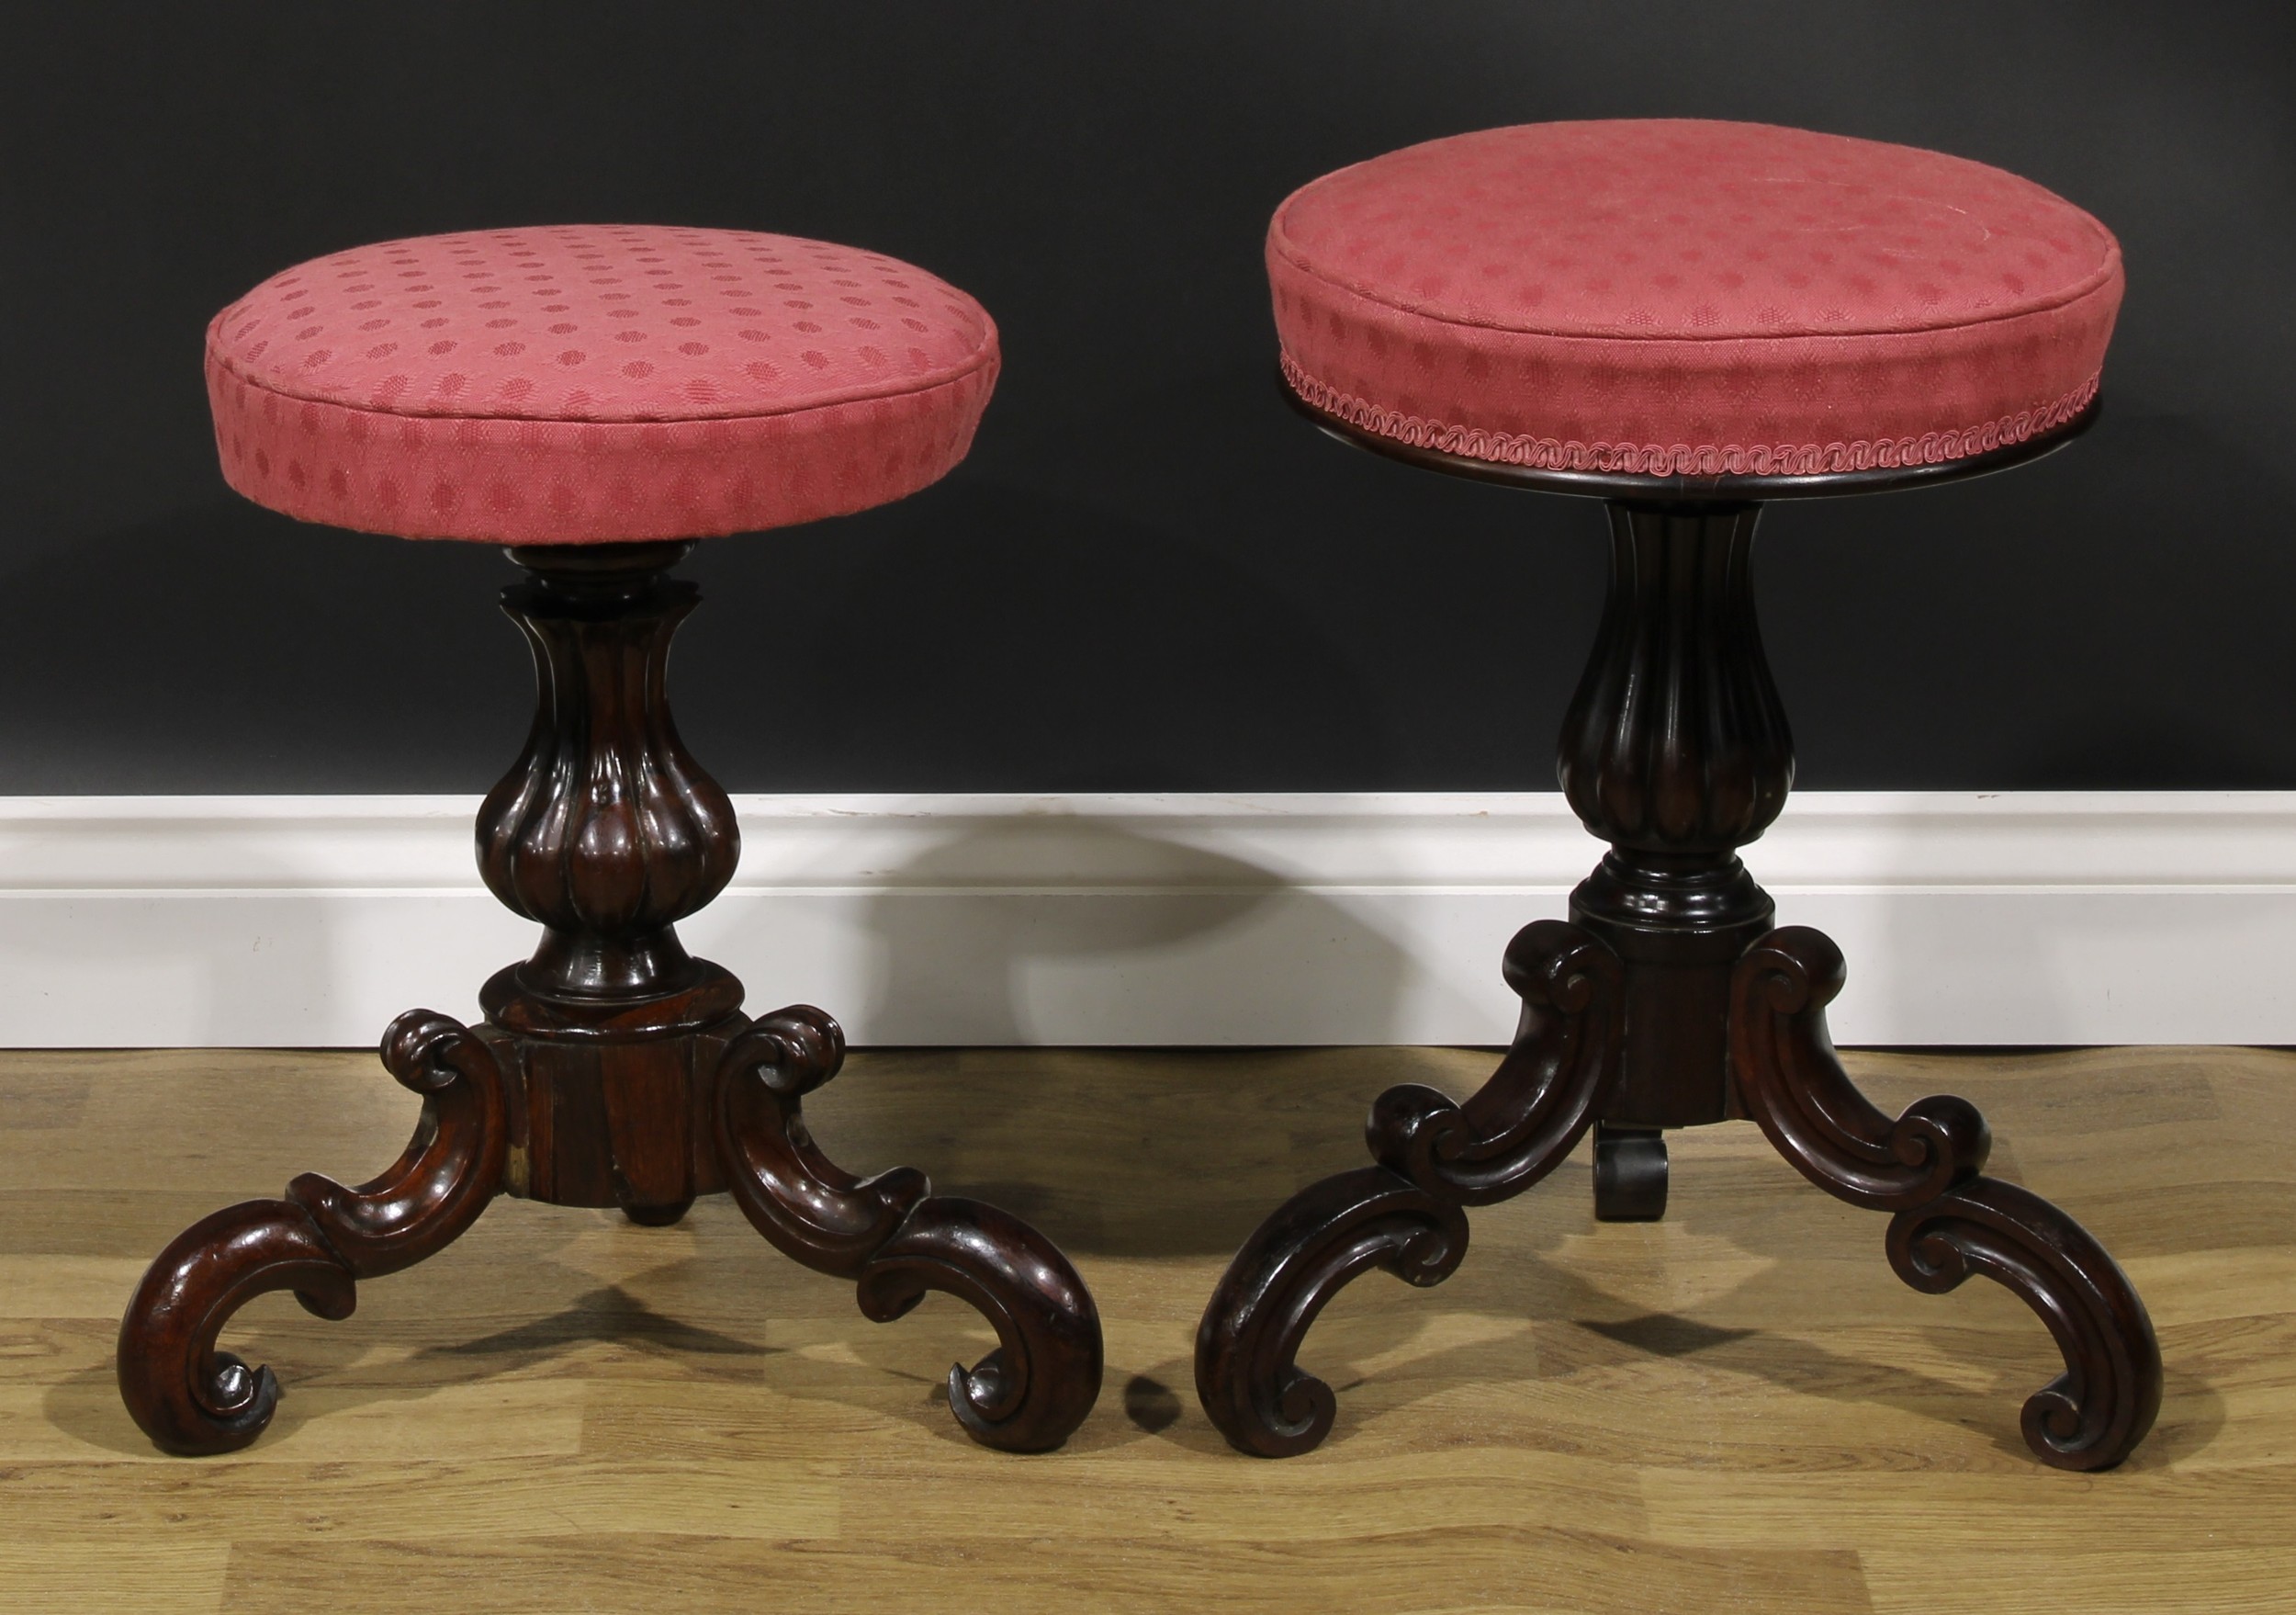 A near pair of Victorian rosewood piano stools, the largest 51cm raising to 74cm high, the seat 35.